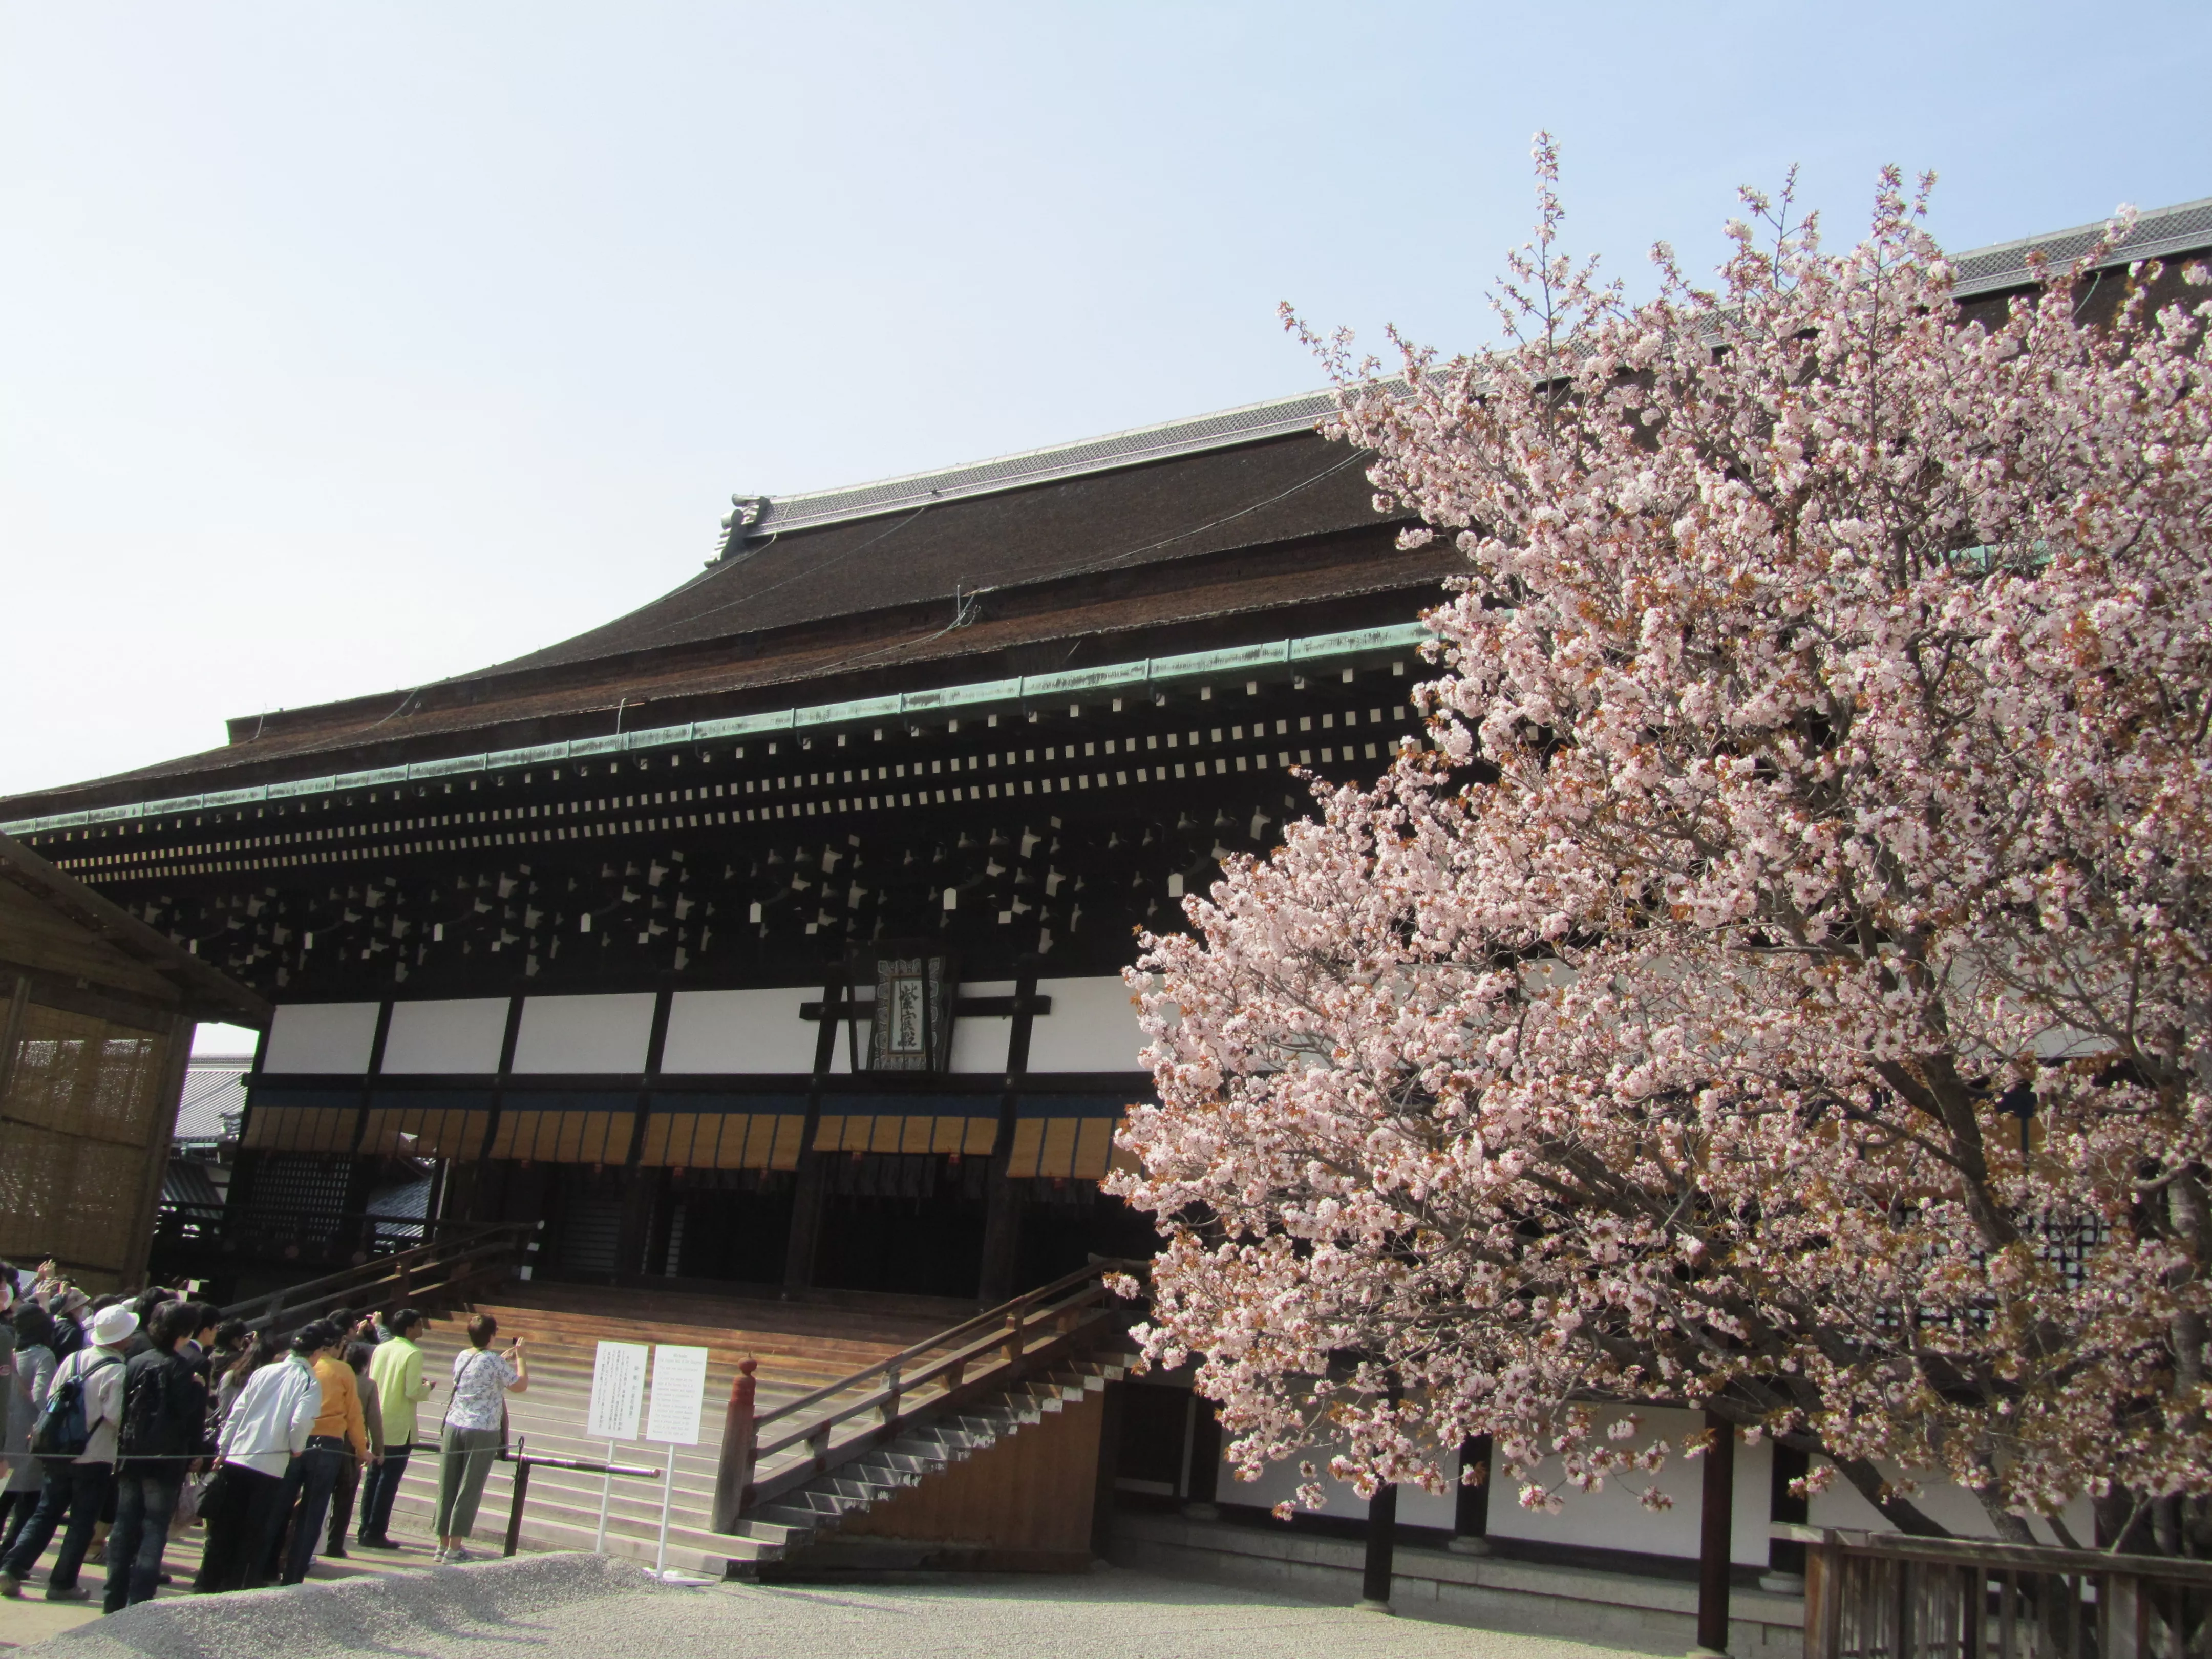 Kyoto Imperial Palace in Japan, East Asia | Architecture - Rated 3.8